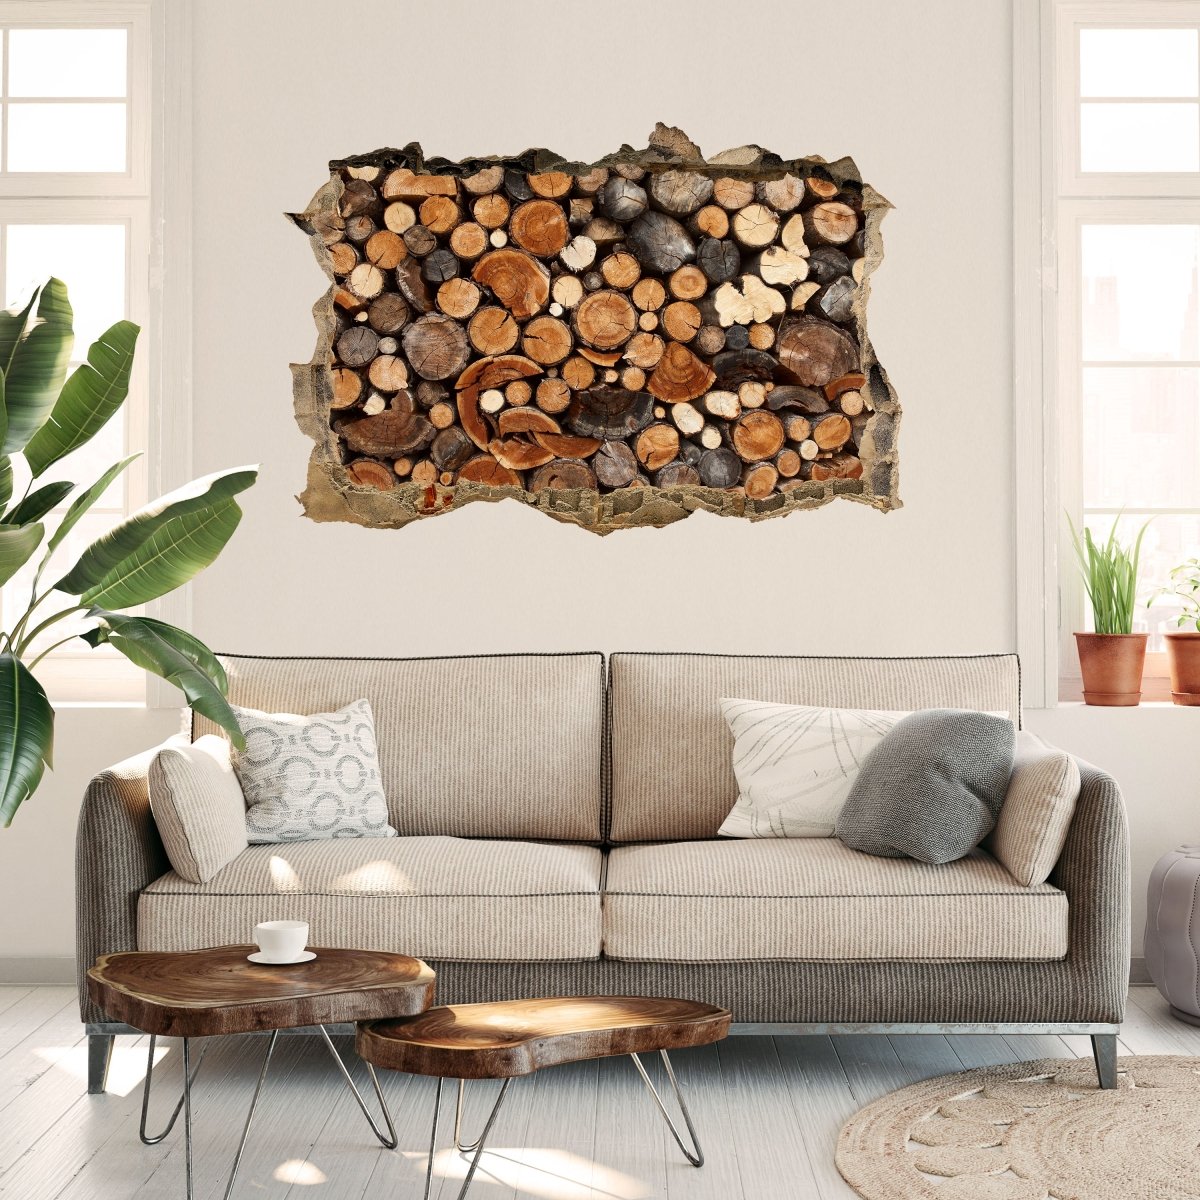 3D wall sticker pile of firewood - Wall Decal M0706